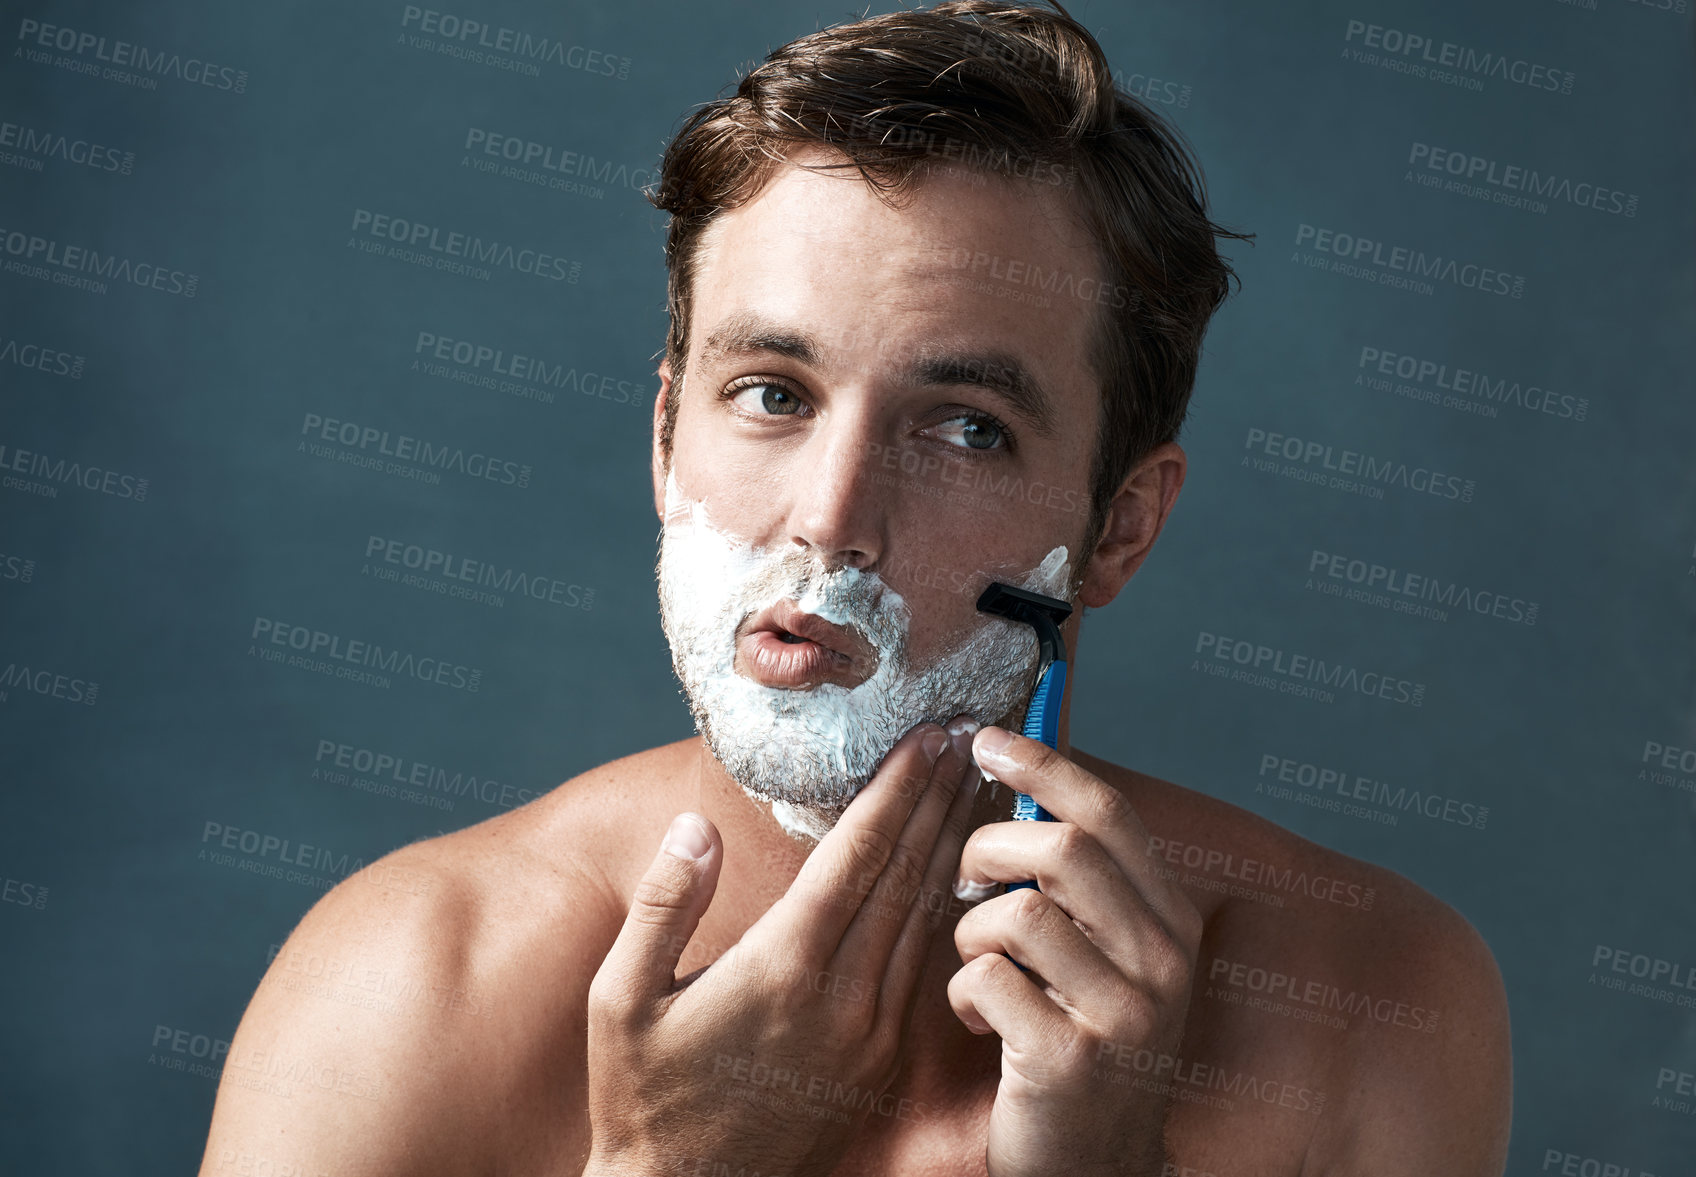 Buy stock photo Cropped shot of a handsome young man shaving against a grey background